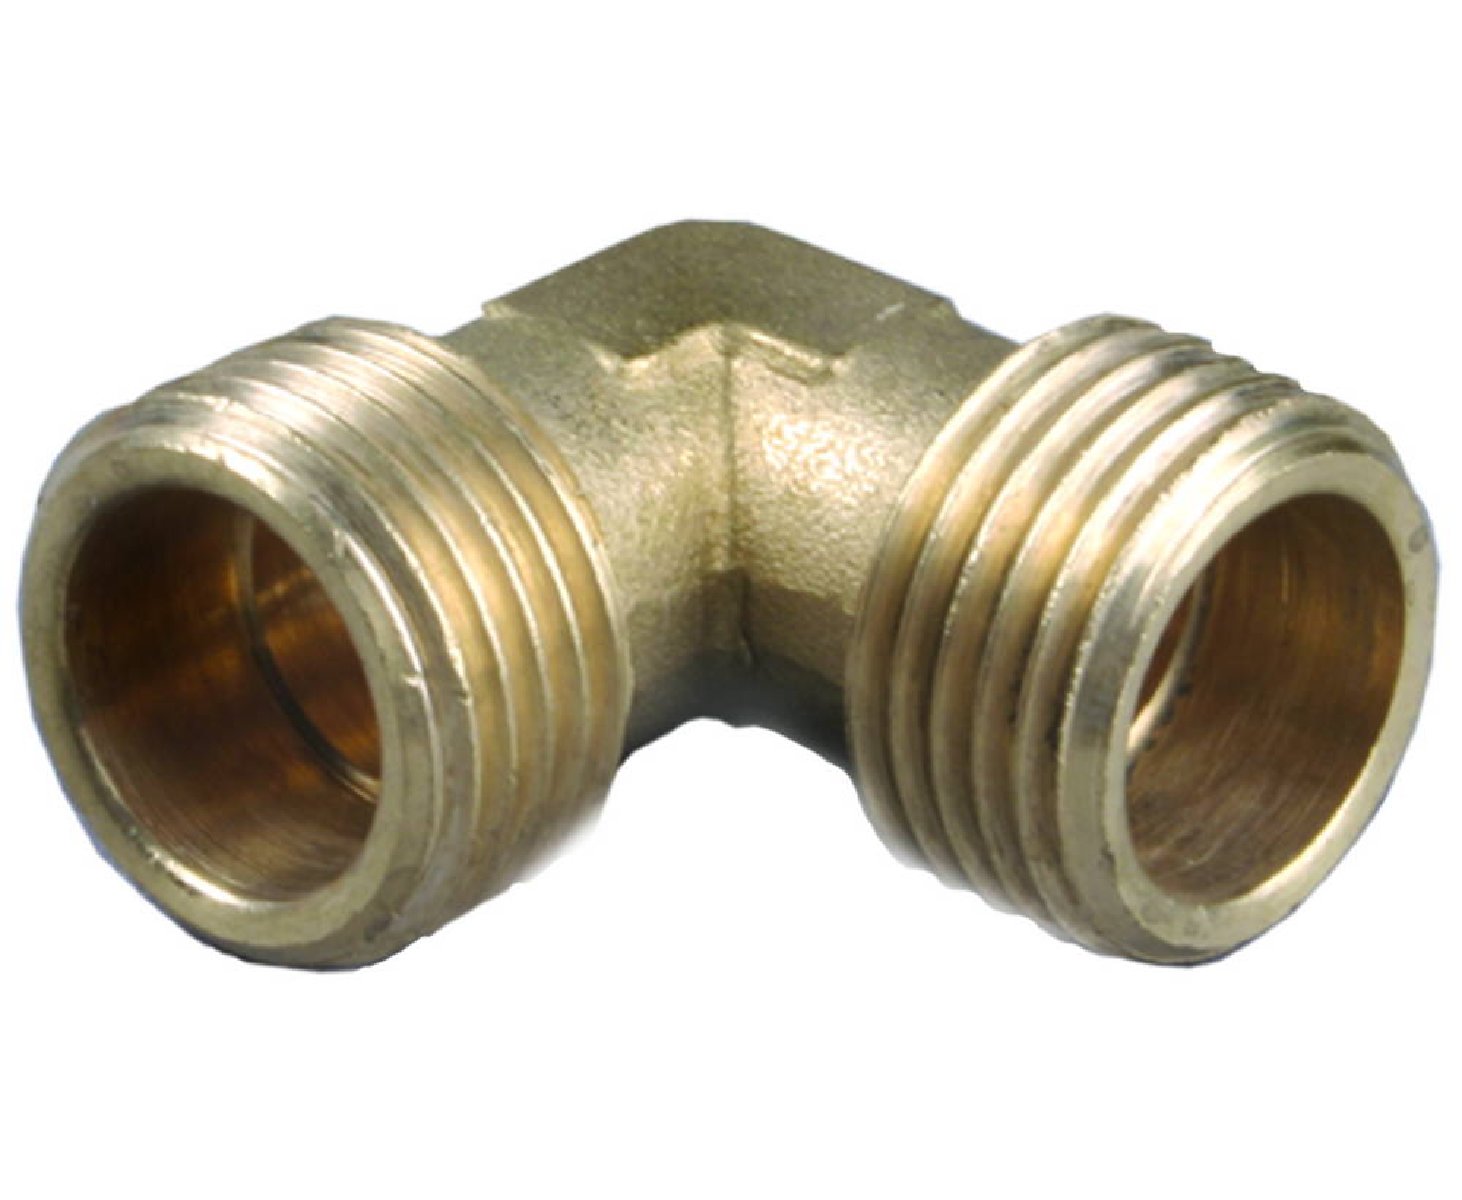  GENERAL FITTINGS   3 4  (51073-S S-3 4)